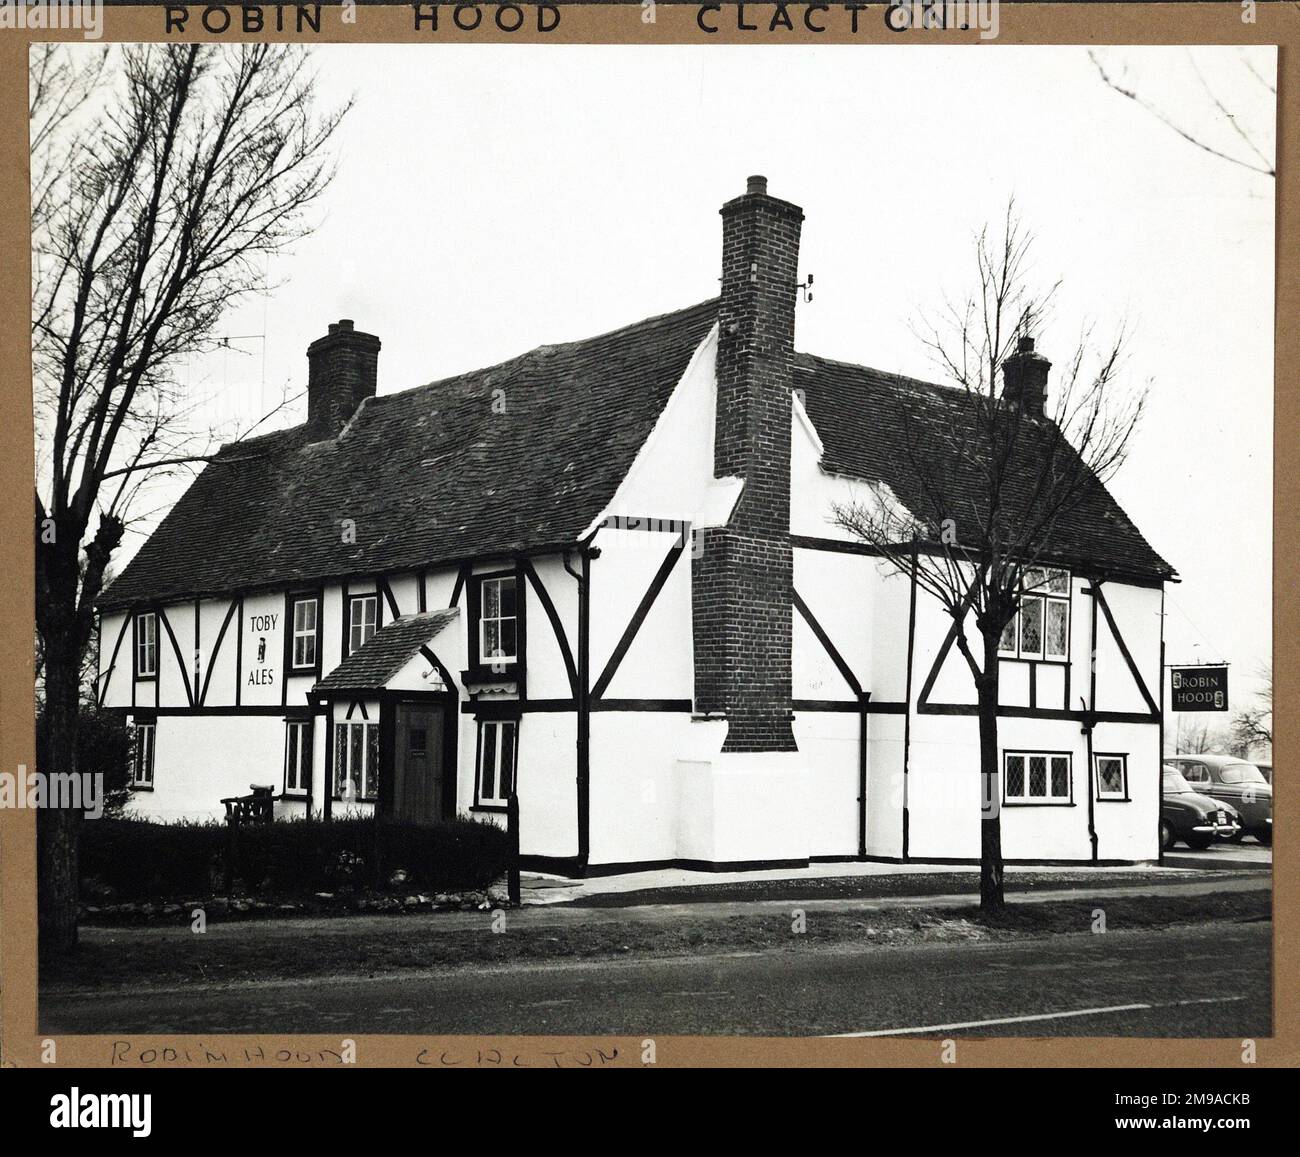 Photograph of Robin Hood PH, Clacton, Essex. The main side of the print (shown here) depicts: Corner on view of the pub.  The back of the print (available on request) details: Nothing for the Robin Hood, Clacton, Essex CO15 4ED. As of July 2018 . Vintage Inn Stock Photo